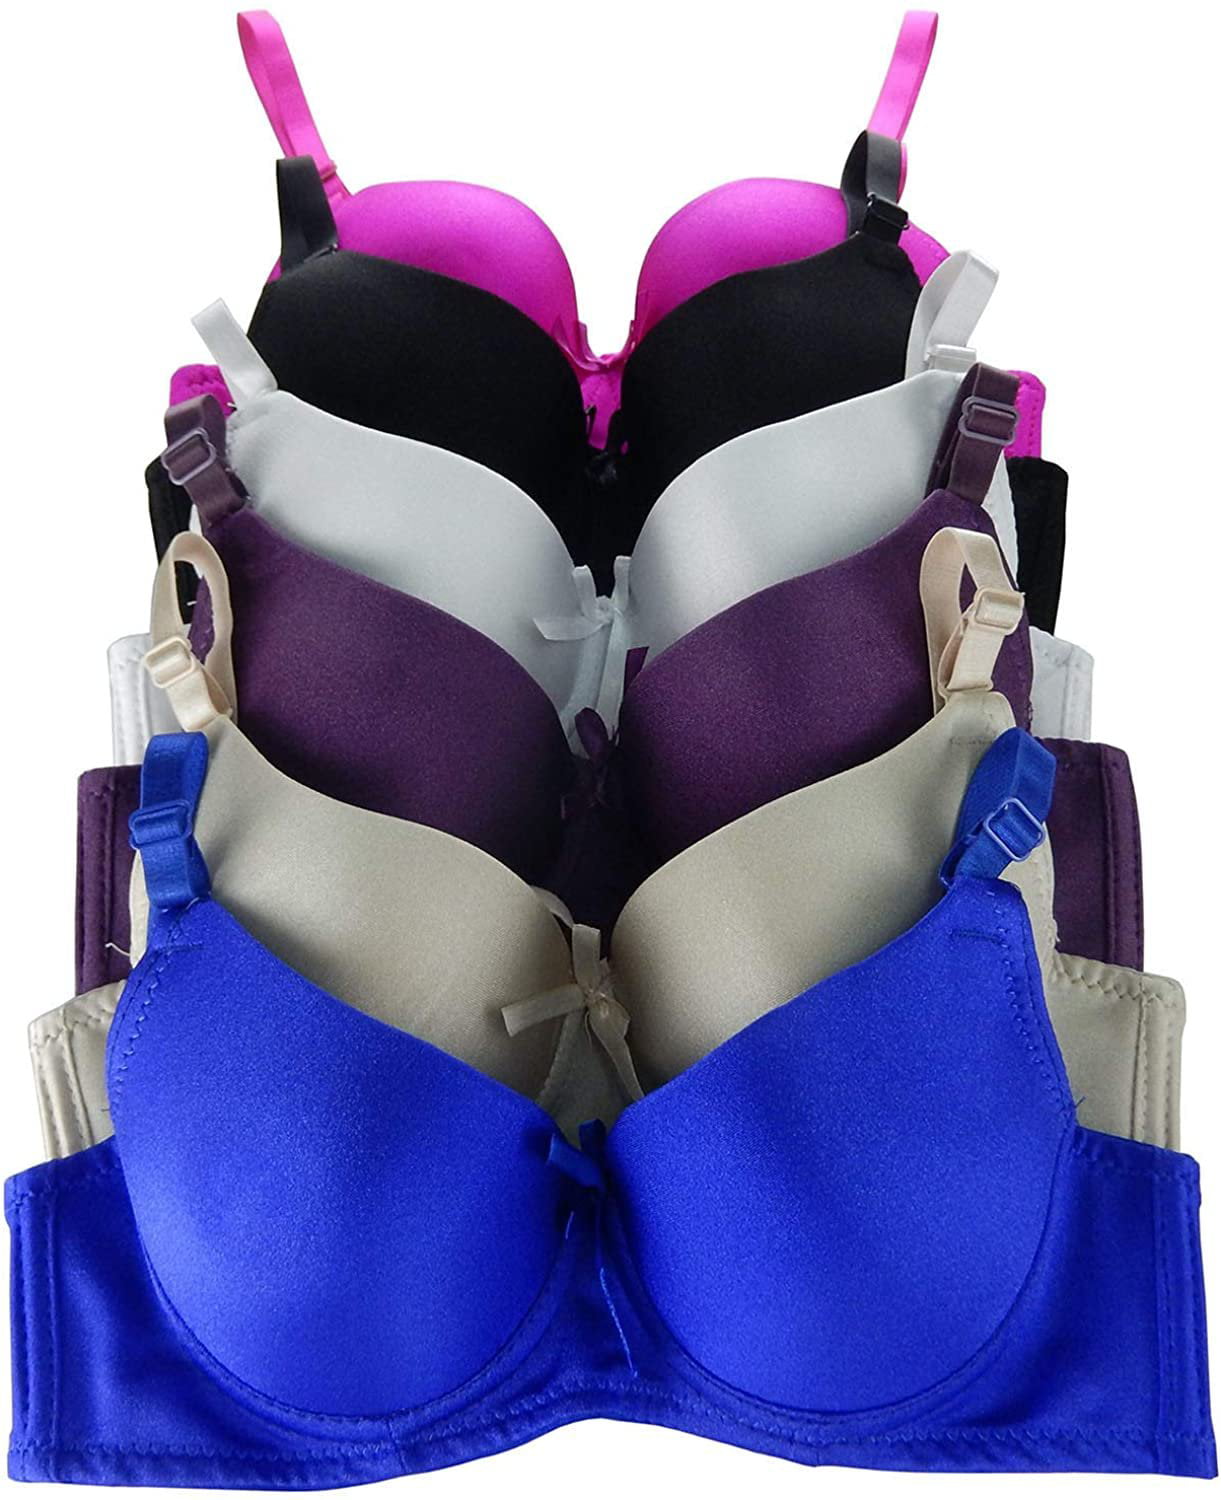 Iheyi 6 Packs of Full Cup Push Up 30A 32A 34A 36A Pushup Bra